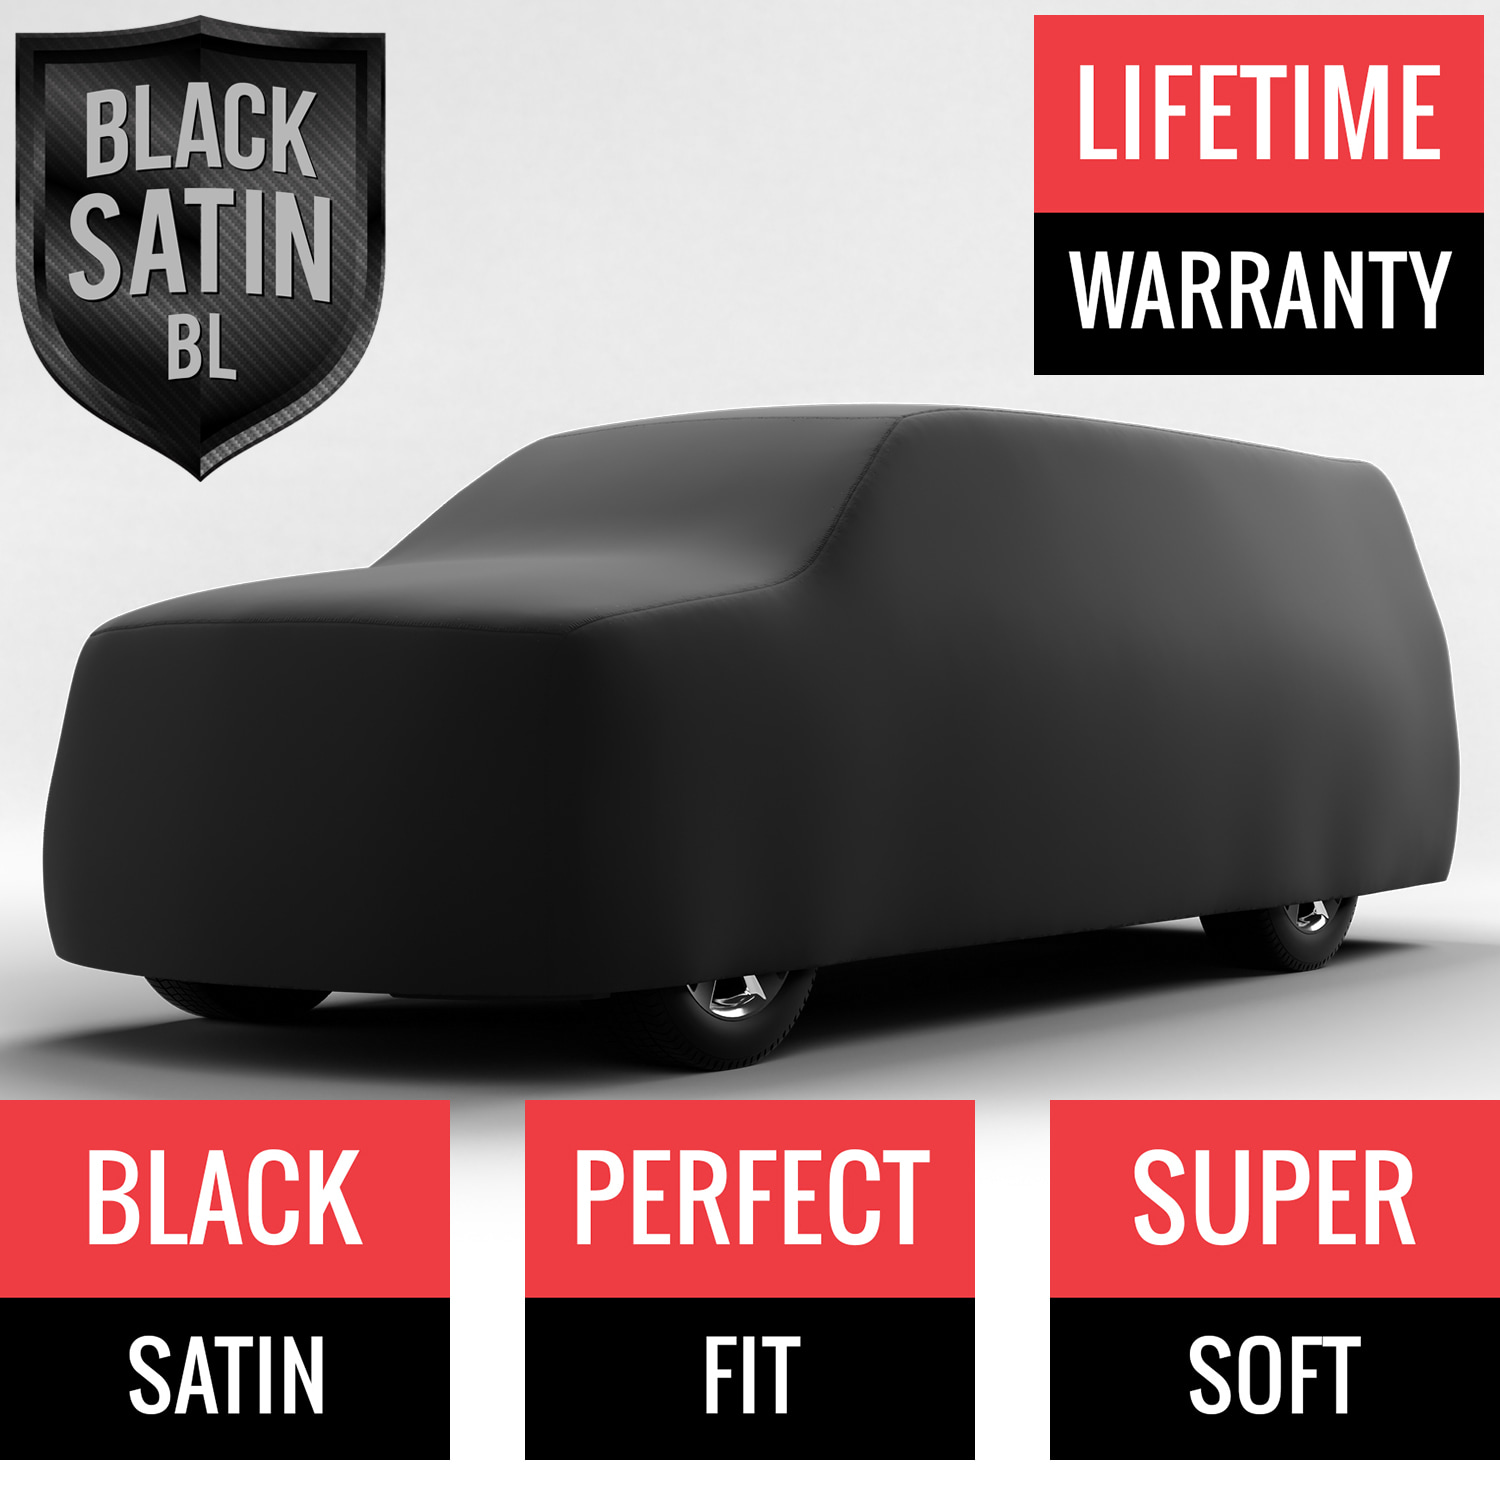 Black Satin BL - Black Car Cover for GMC C1500 1998 Regular Cab Pickup 8.0 Feet Bed with Camper Shell